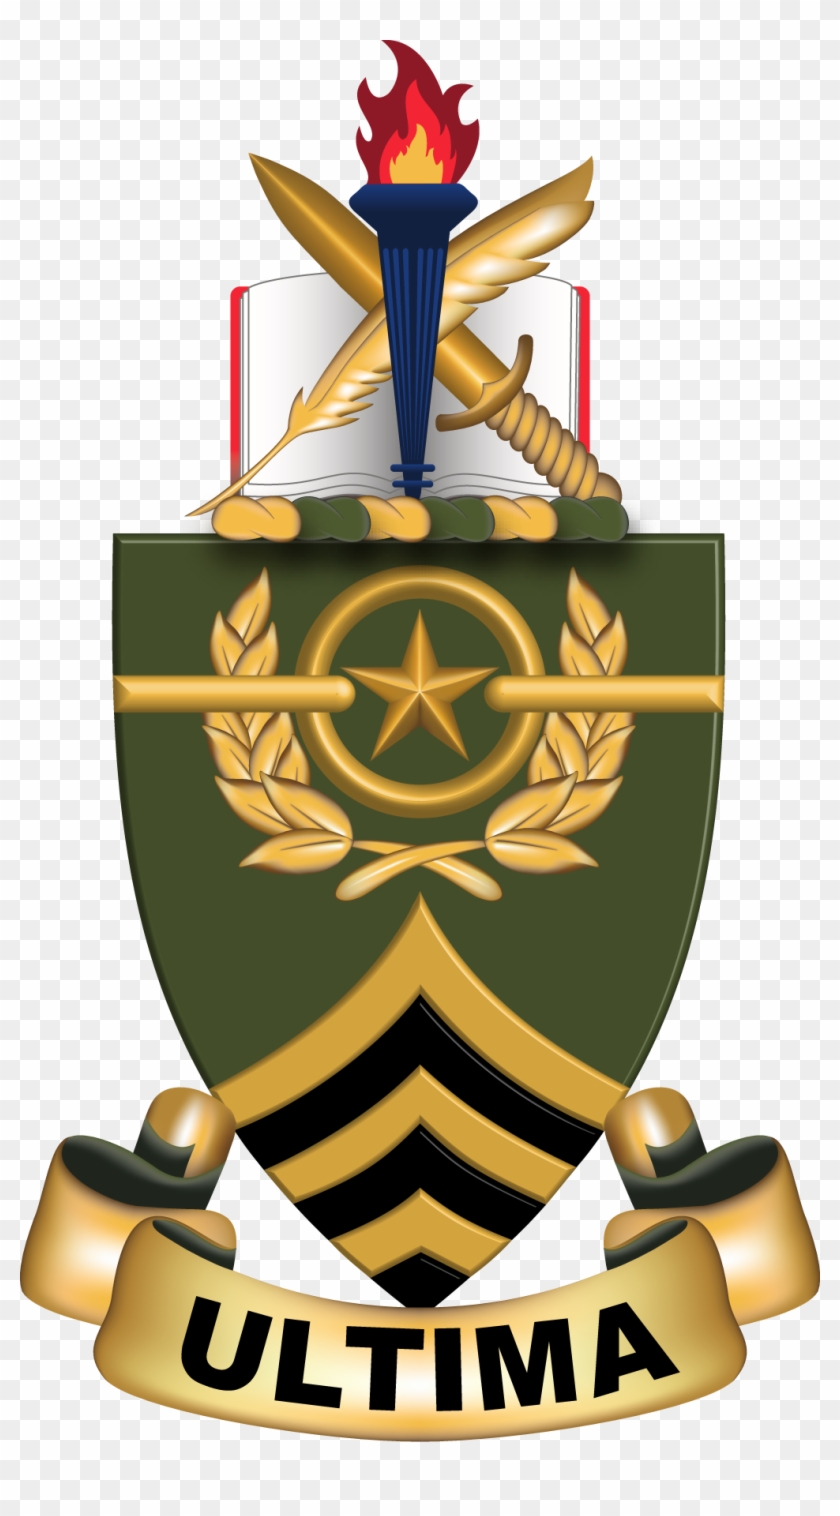 Mission - Nco Leadership Center Of Excellence Clipart #2796864